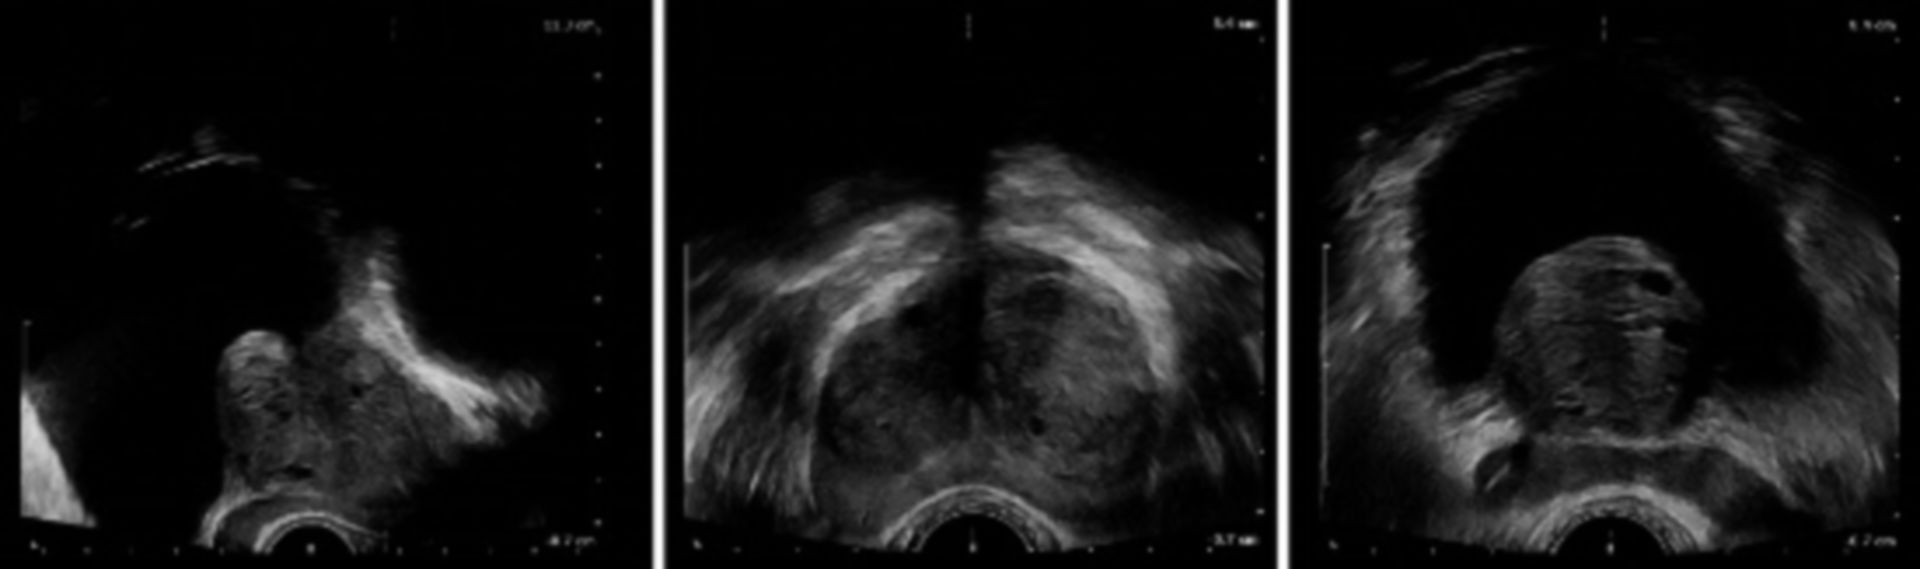 Benign hyperplasia of the prostate with medial lobe in TRUS